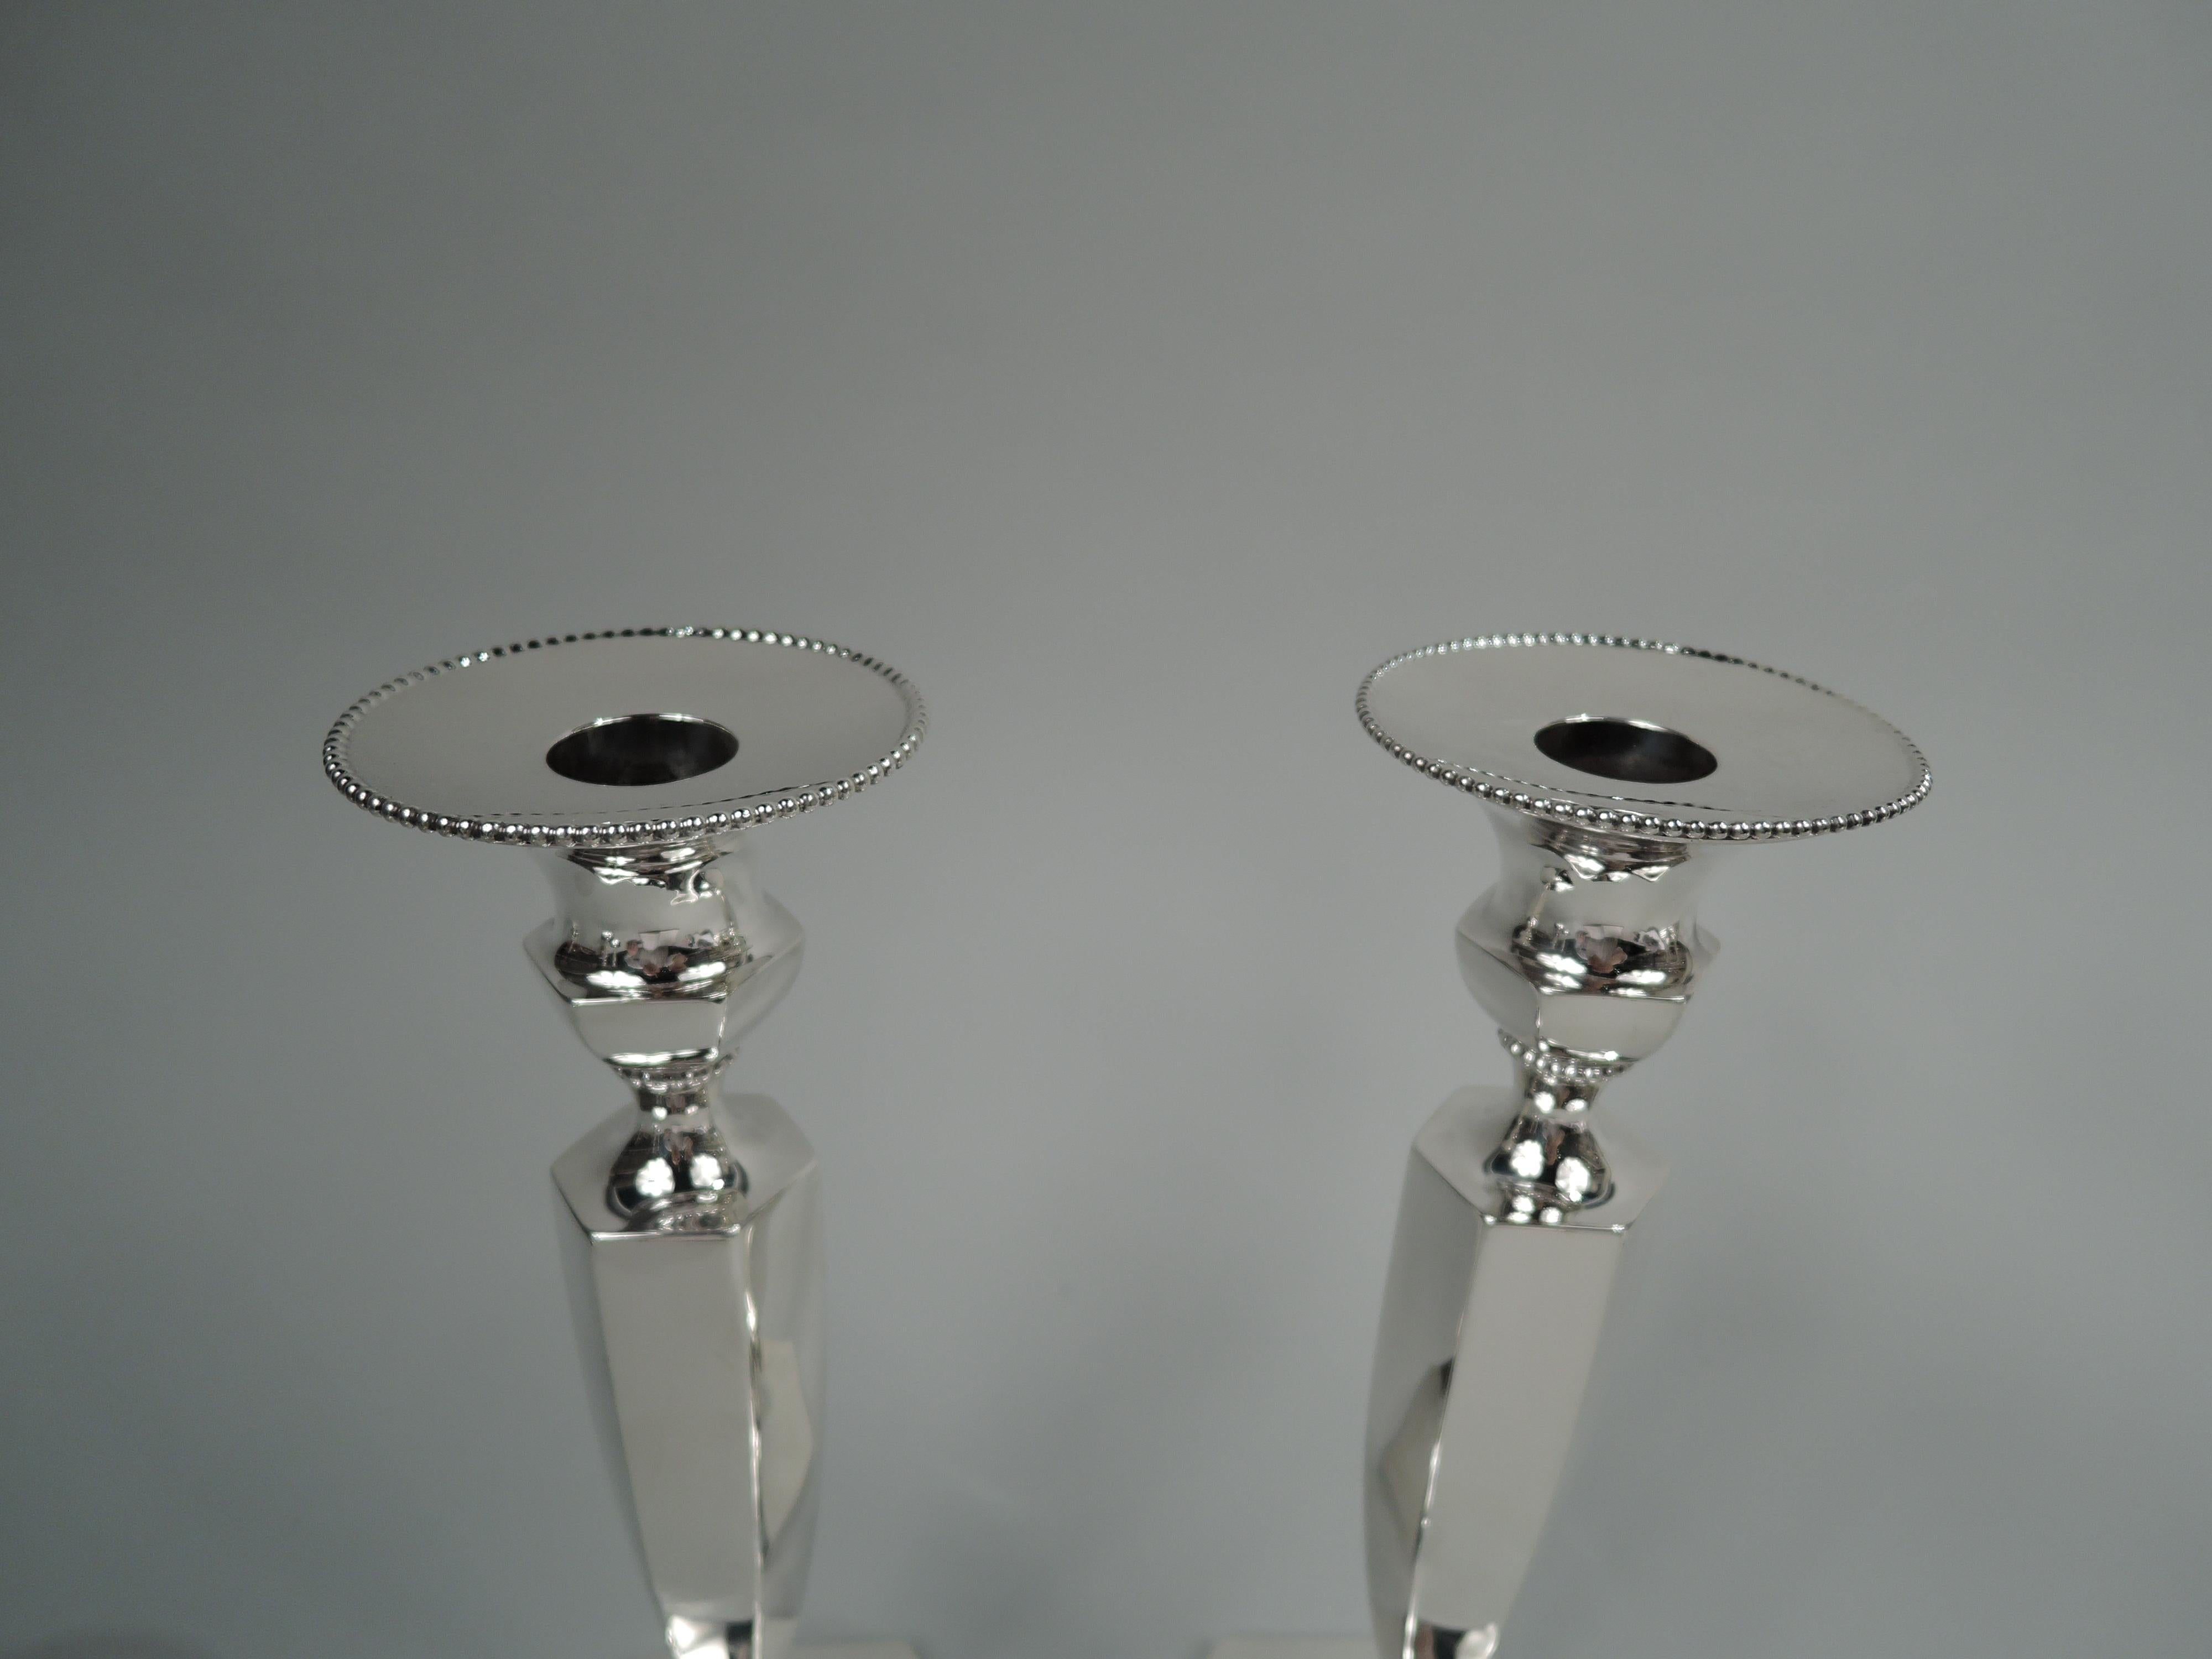 Pair of Modern Georgian sterling silver candlesticks. Made by Roger Williams Silver Co. (later part of Gorham) in Providence, ca 1900. Each: Bellied socket with round detachable bobeche; tapering shaft on raised foot. Beaded and faceted. Fully